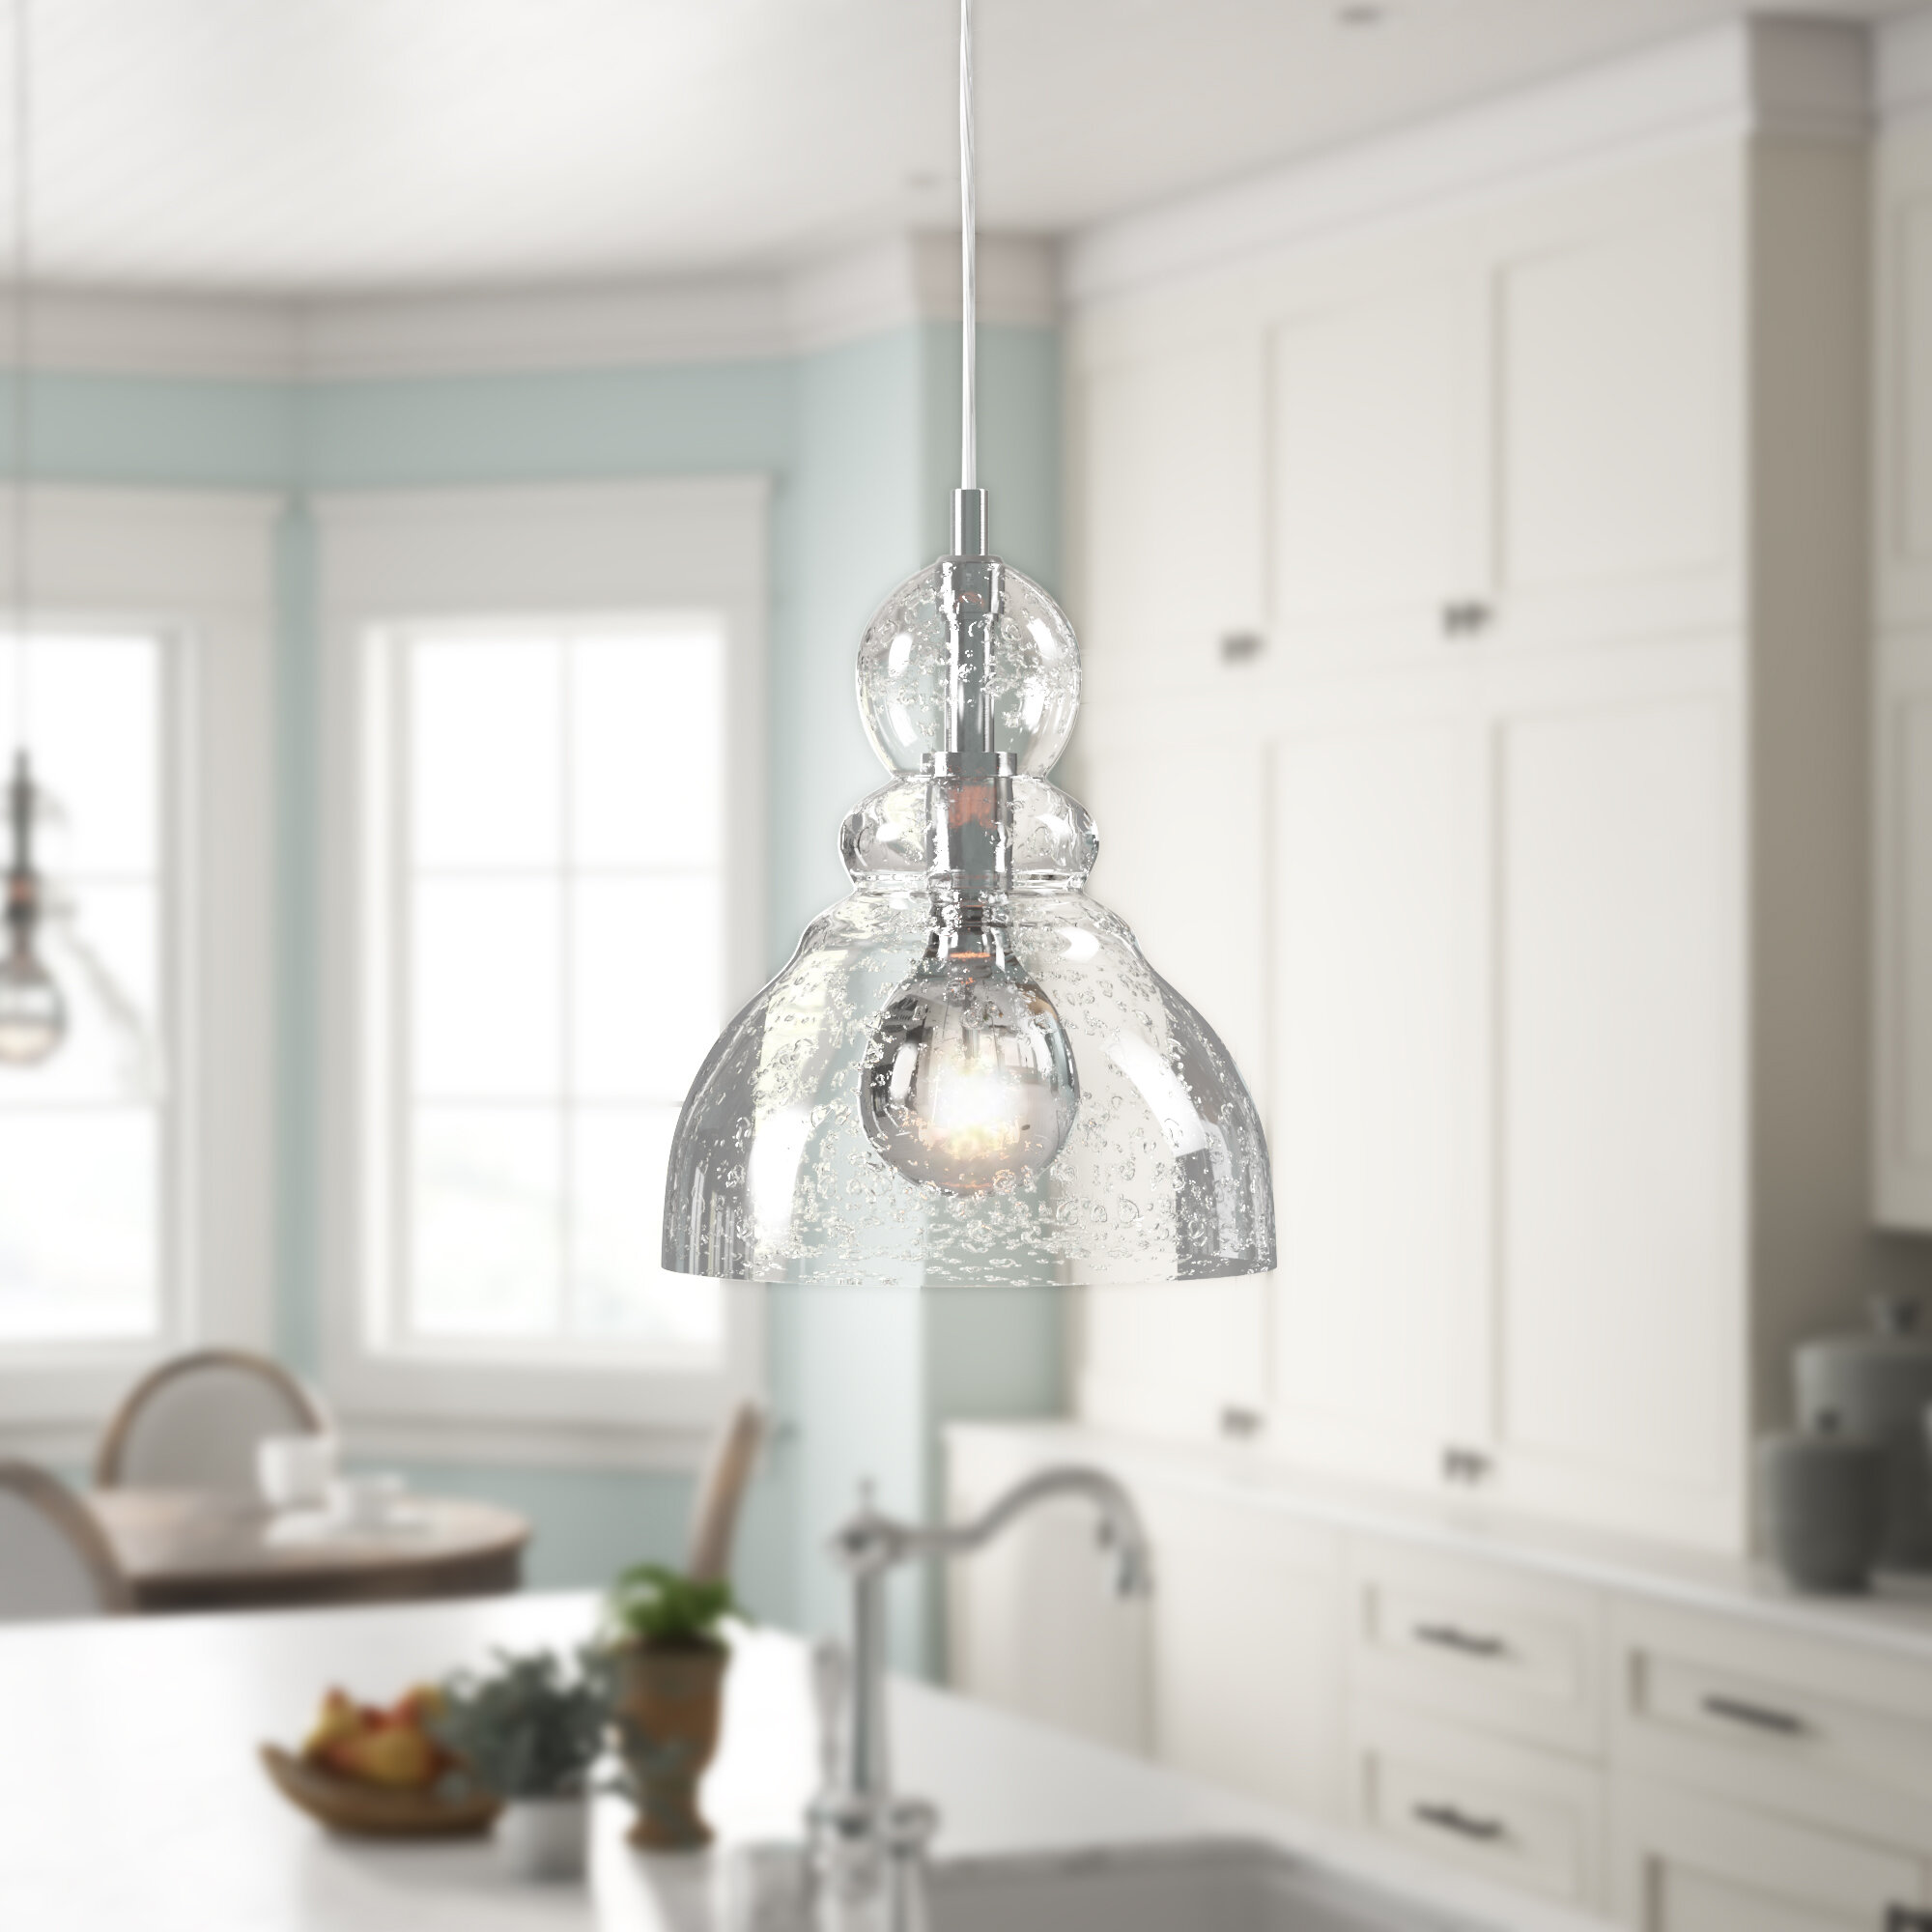 Pendant Lighting Contemporary Pendant Light Adjustable Single Pendant Hanging Light for Kitchen Island Dining Room Farmhouse with Clear and White Glass Shade Mini Pendant Light Fixture in Satin Nickel